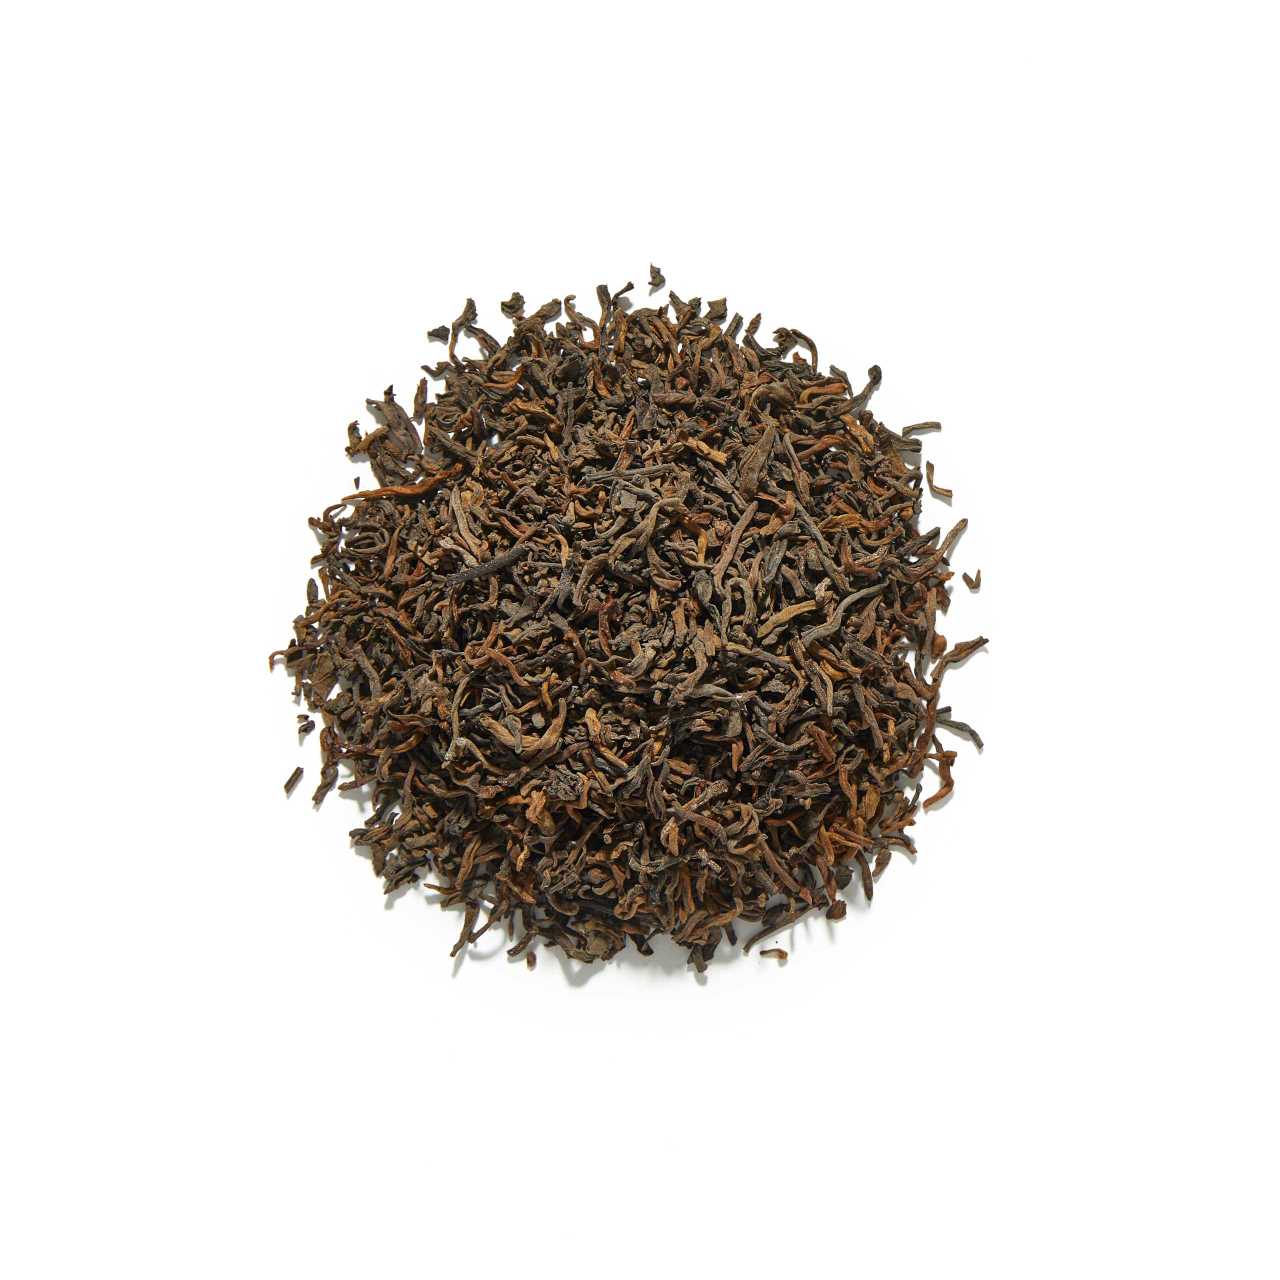 Imperial Aged Puerh Loose Leaf Tea Arranged in a Circle